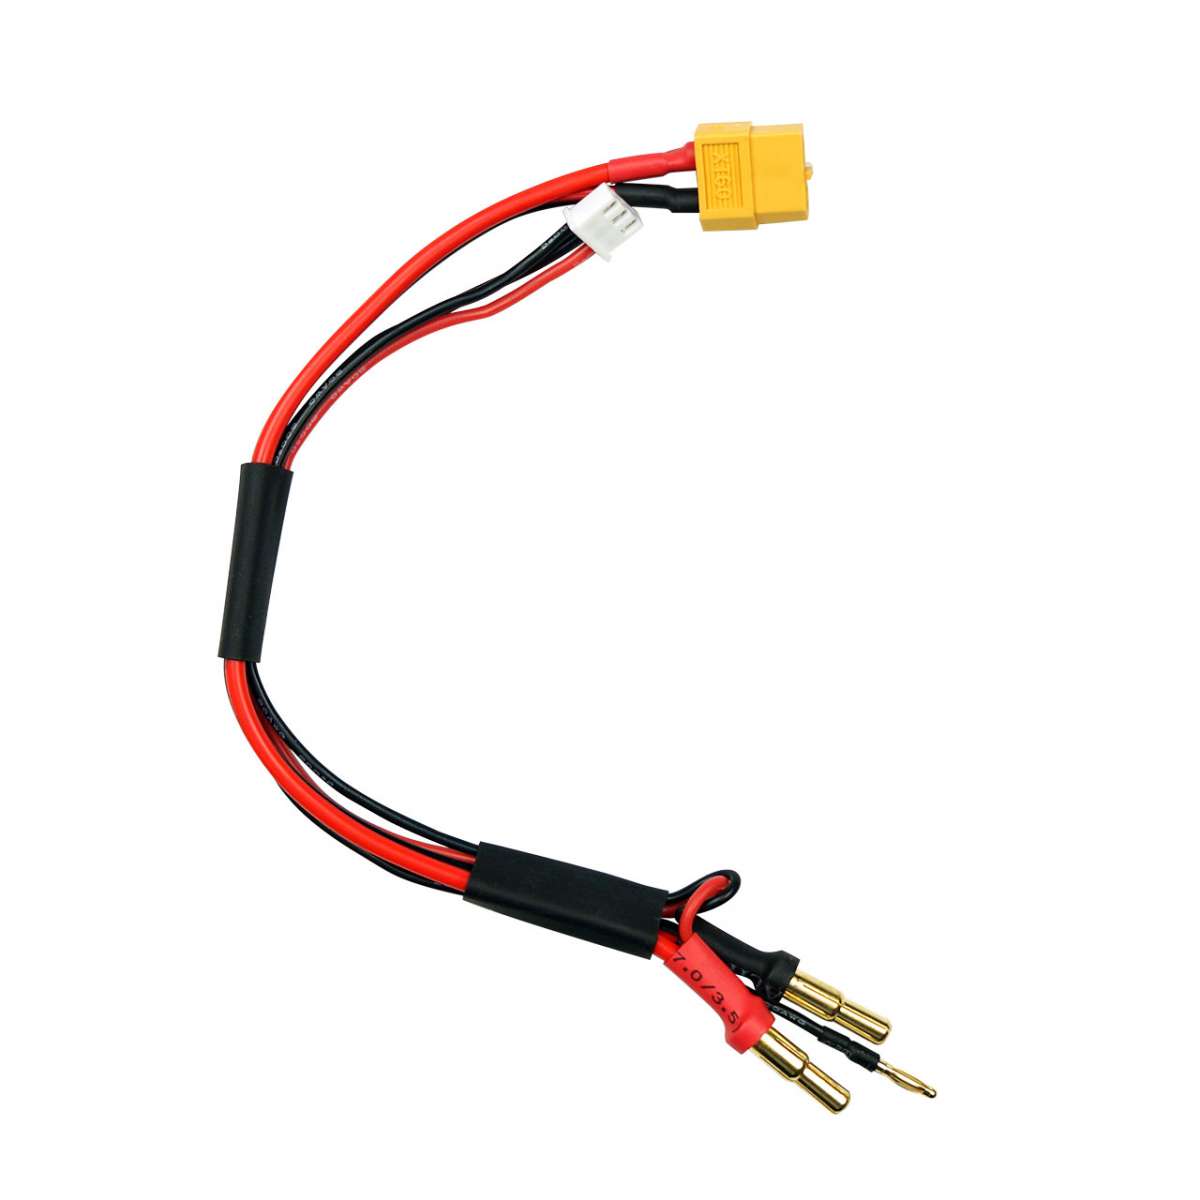 SkyRC 600023-14 - Charging Cable XT60 for 2s Battery for 4mm and 5mm